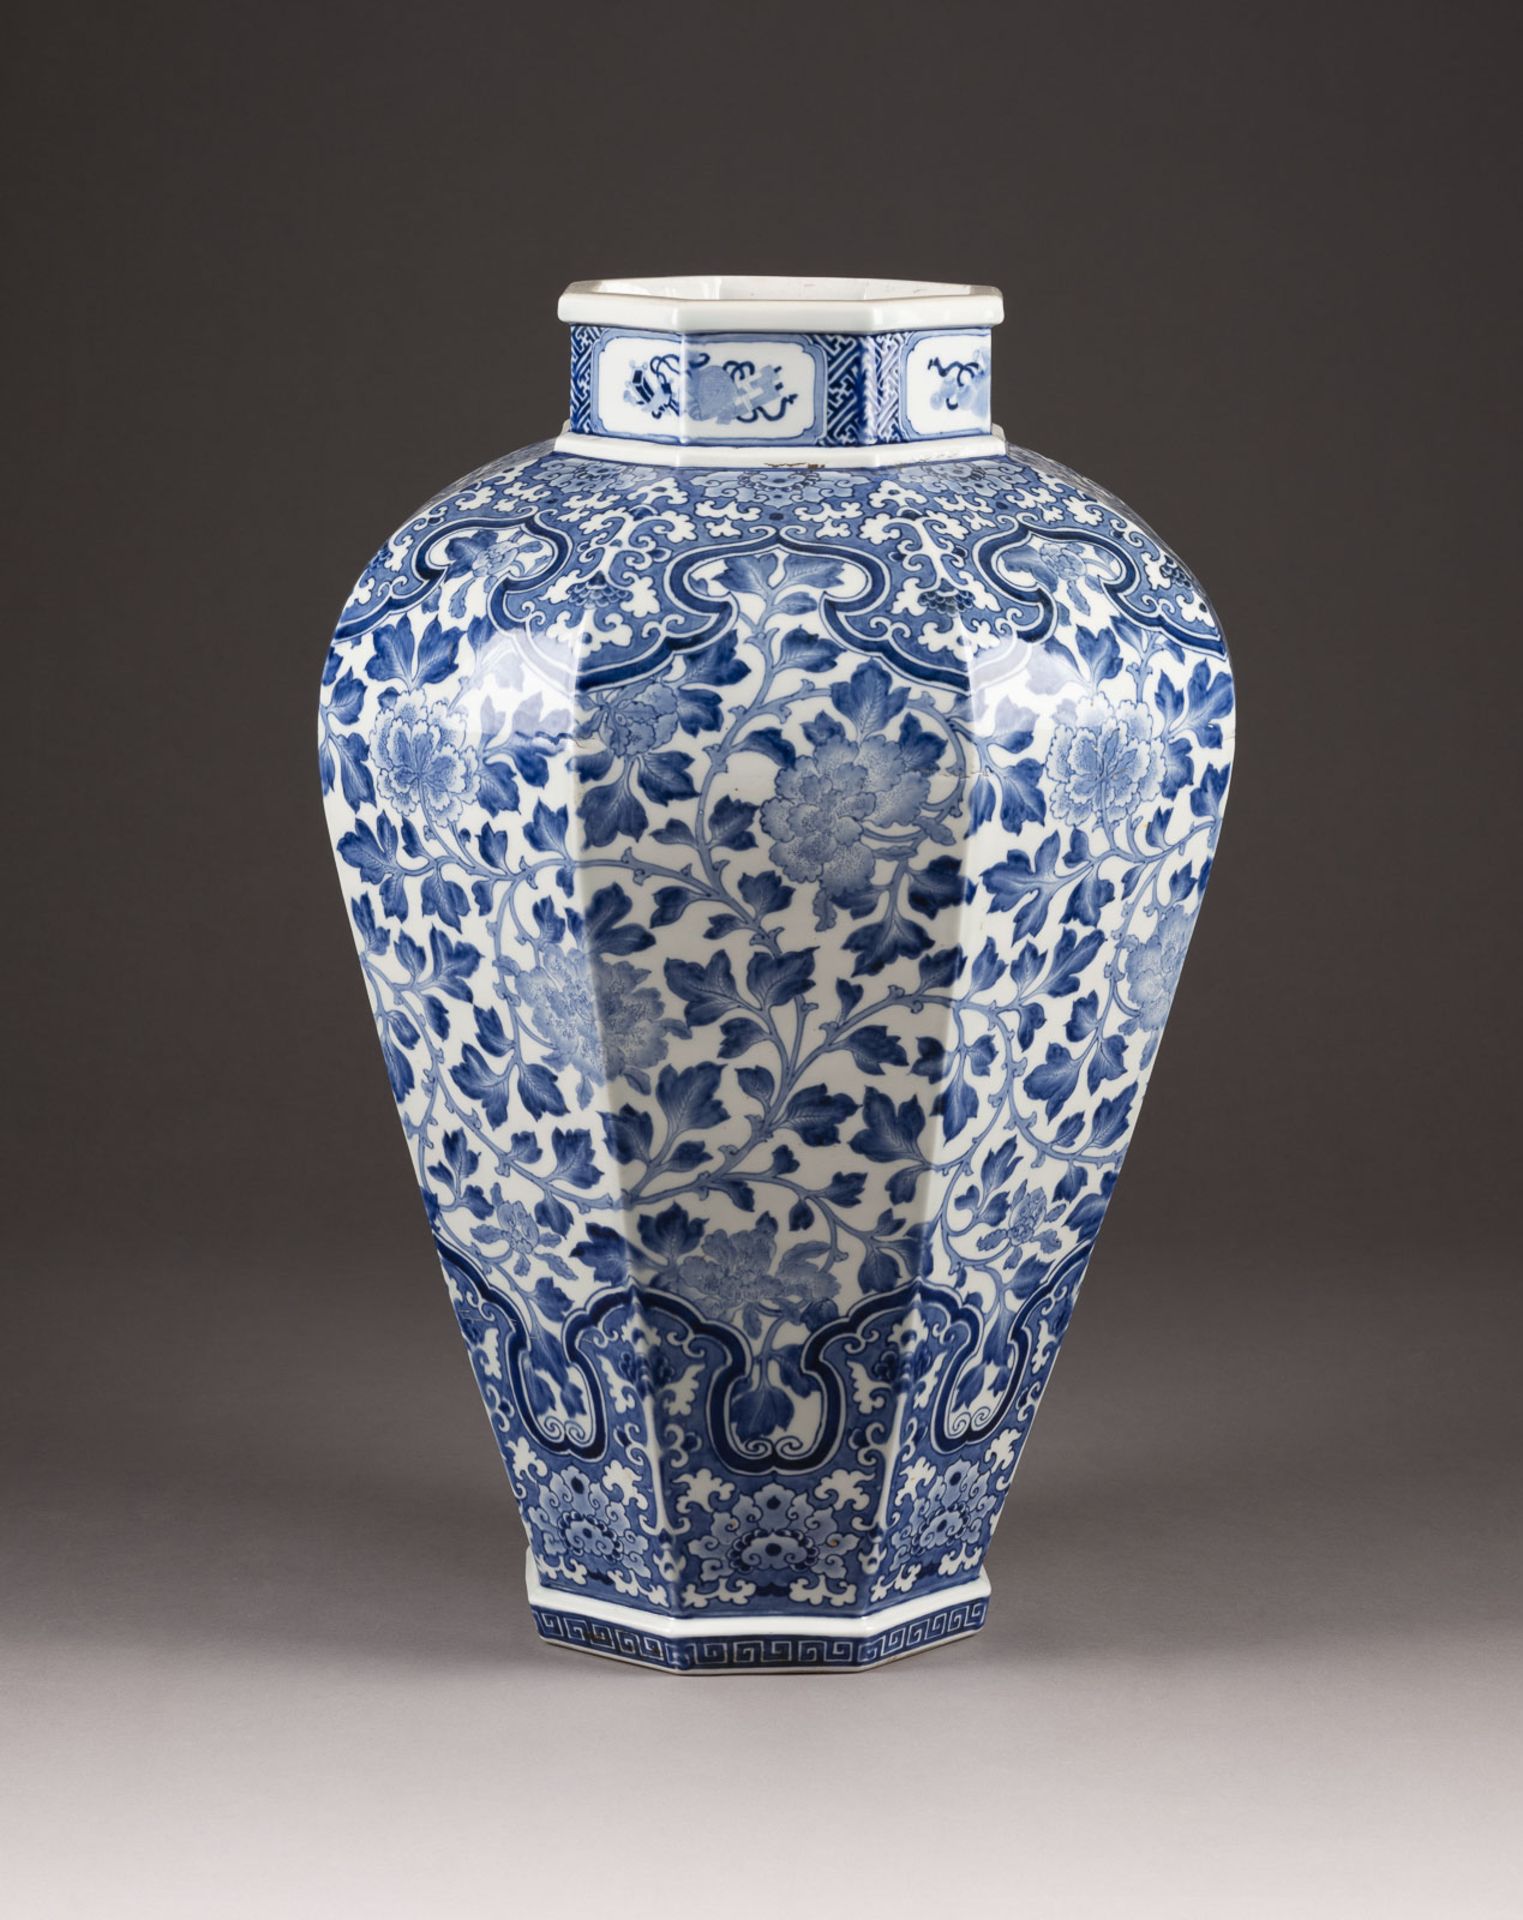 A LARGE BLUE-AND-WHITE OCTAGONAL VASE